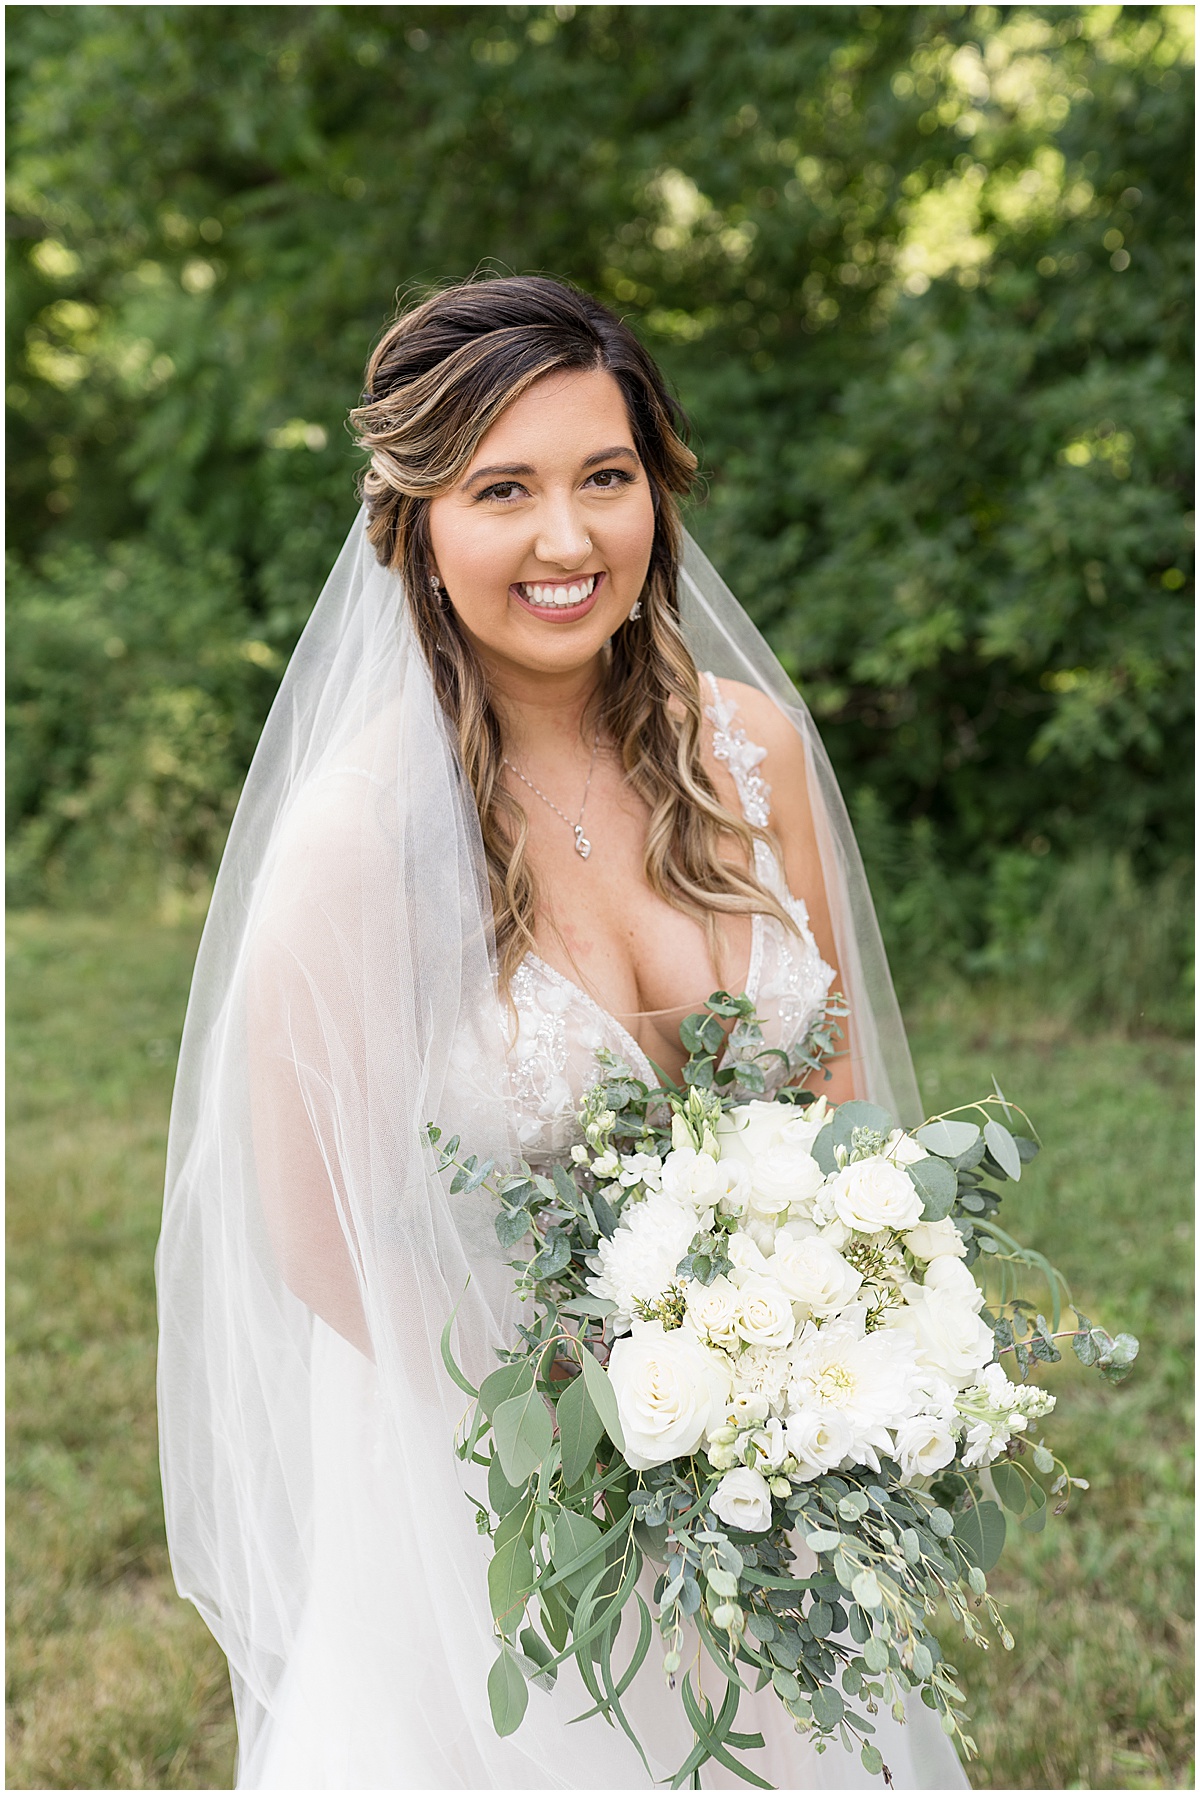 Outdoor bridal portrait at Stables Event Center wedding in Lafayette, Indiana